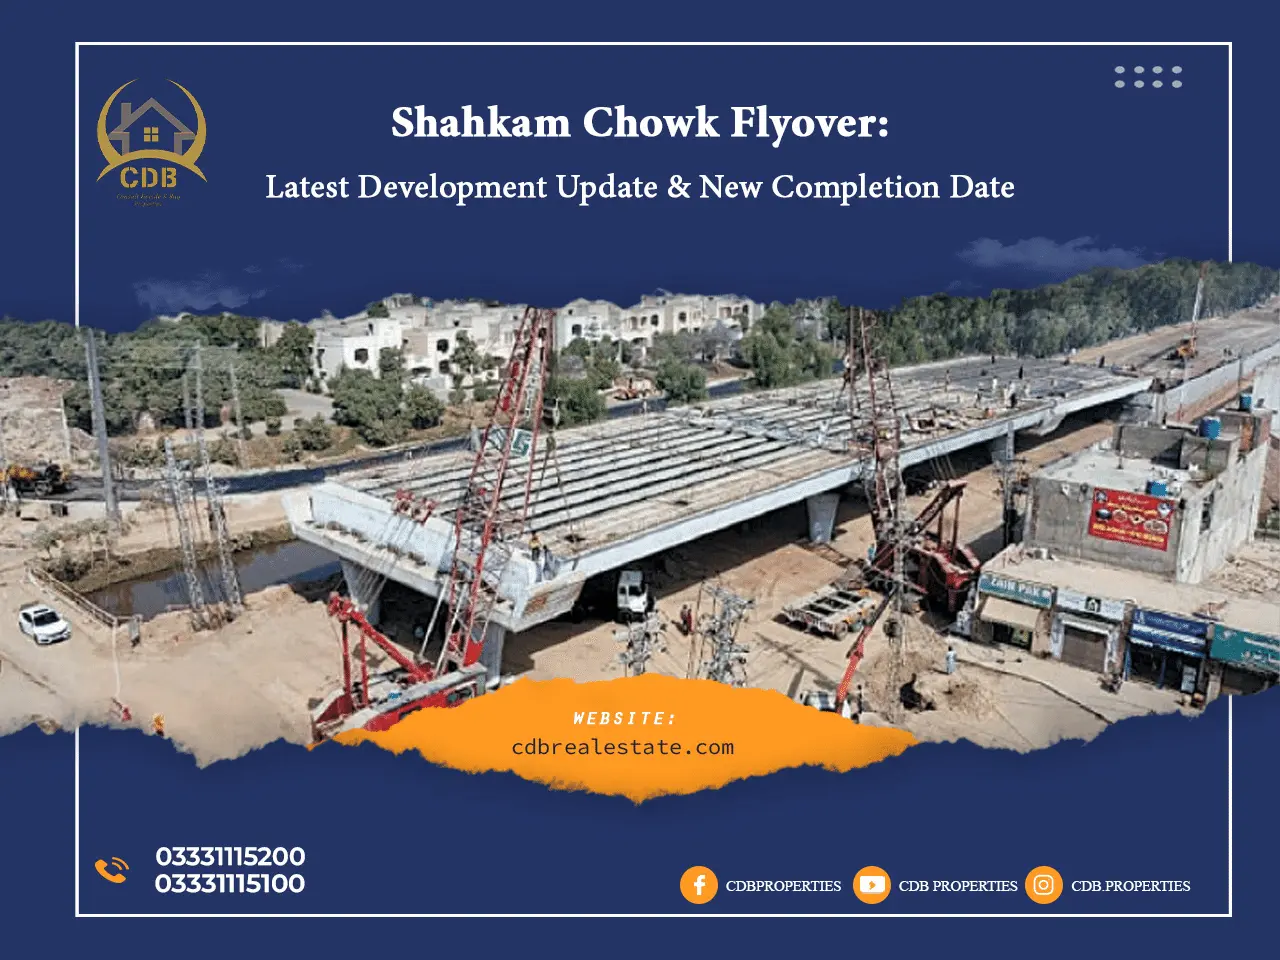 Shahka, Chowk Flyover Completion Date